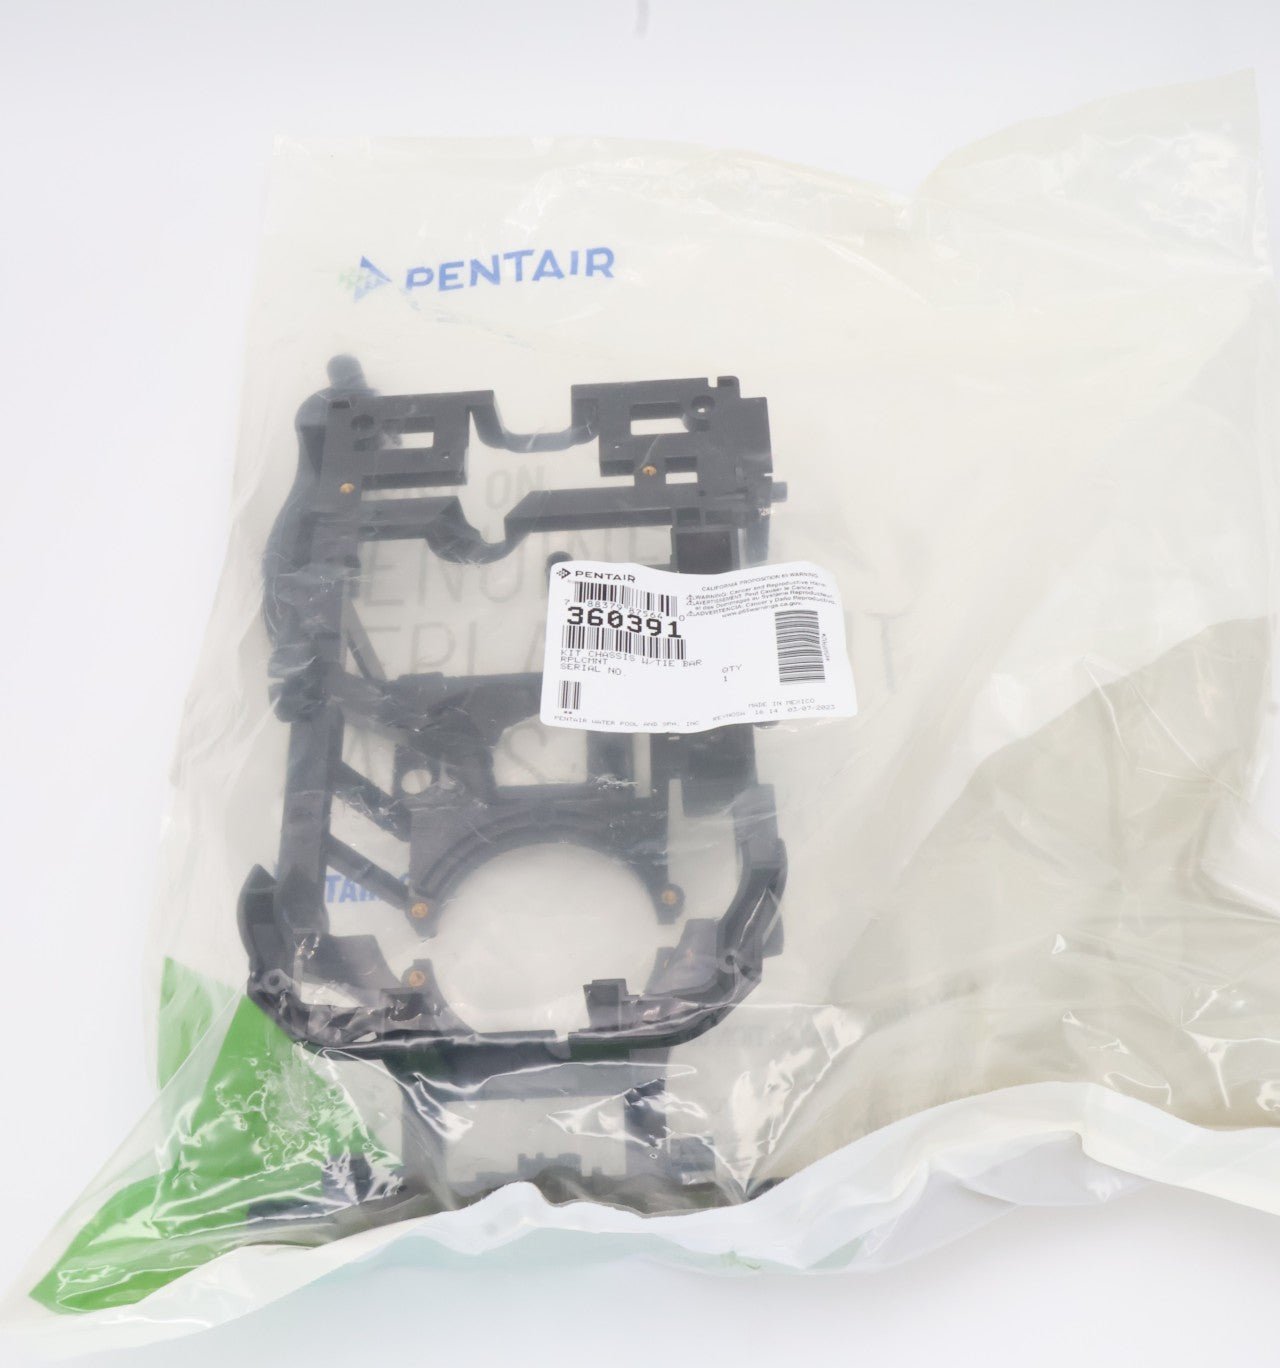 Pentair Chassis Kit w/ Tie Bar for Racer Cleaners 360391 - Cleaner Parts - img-4